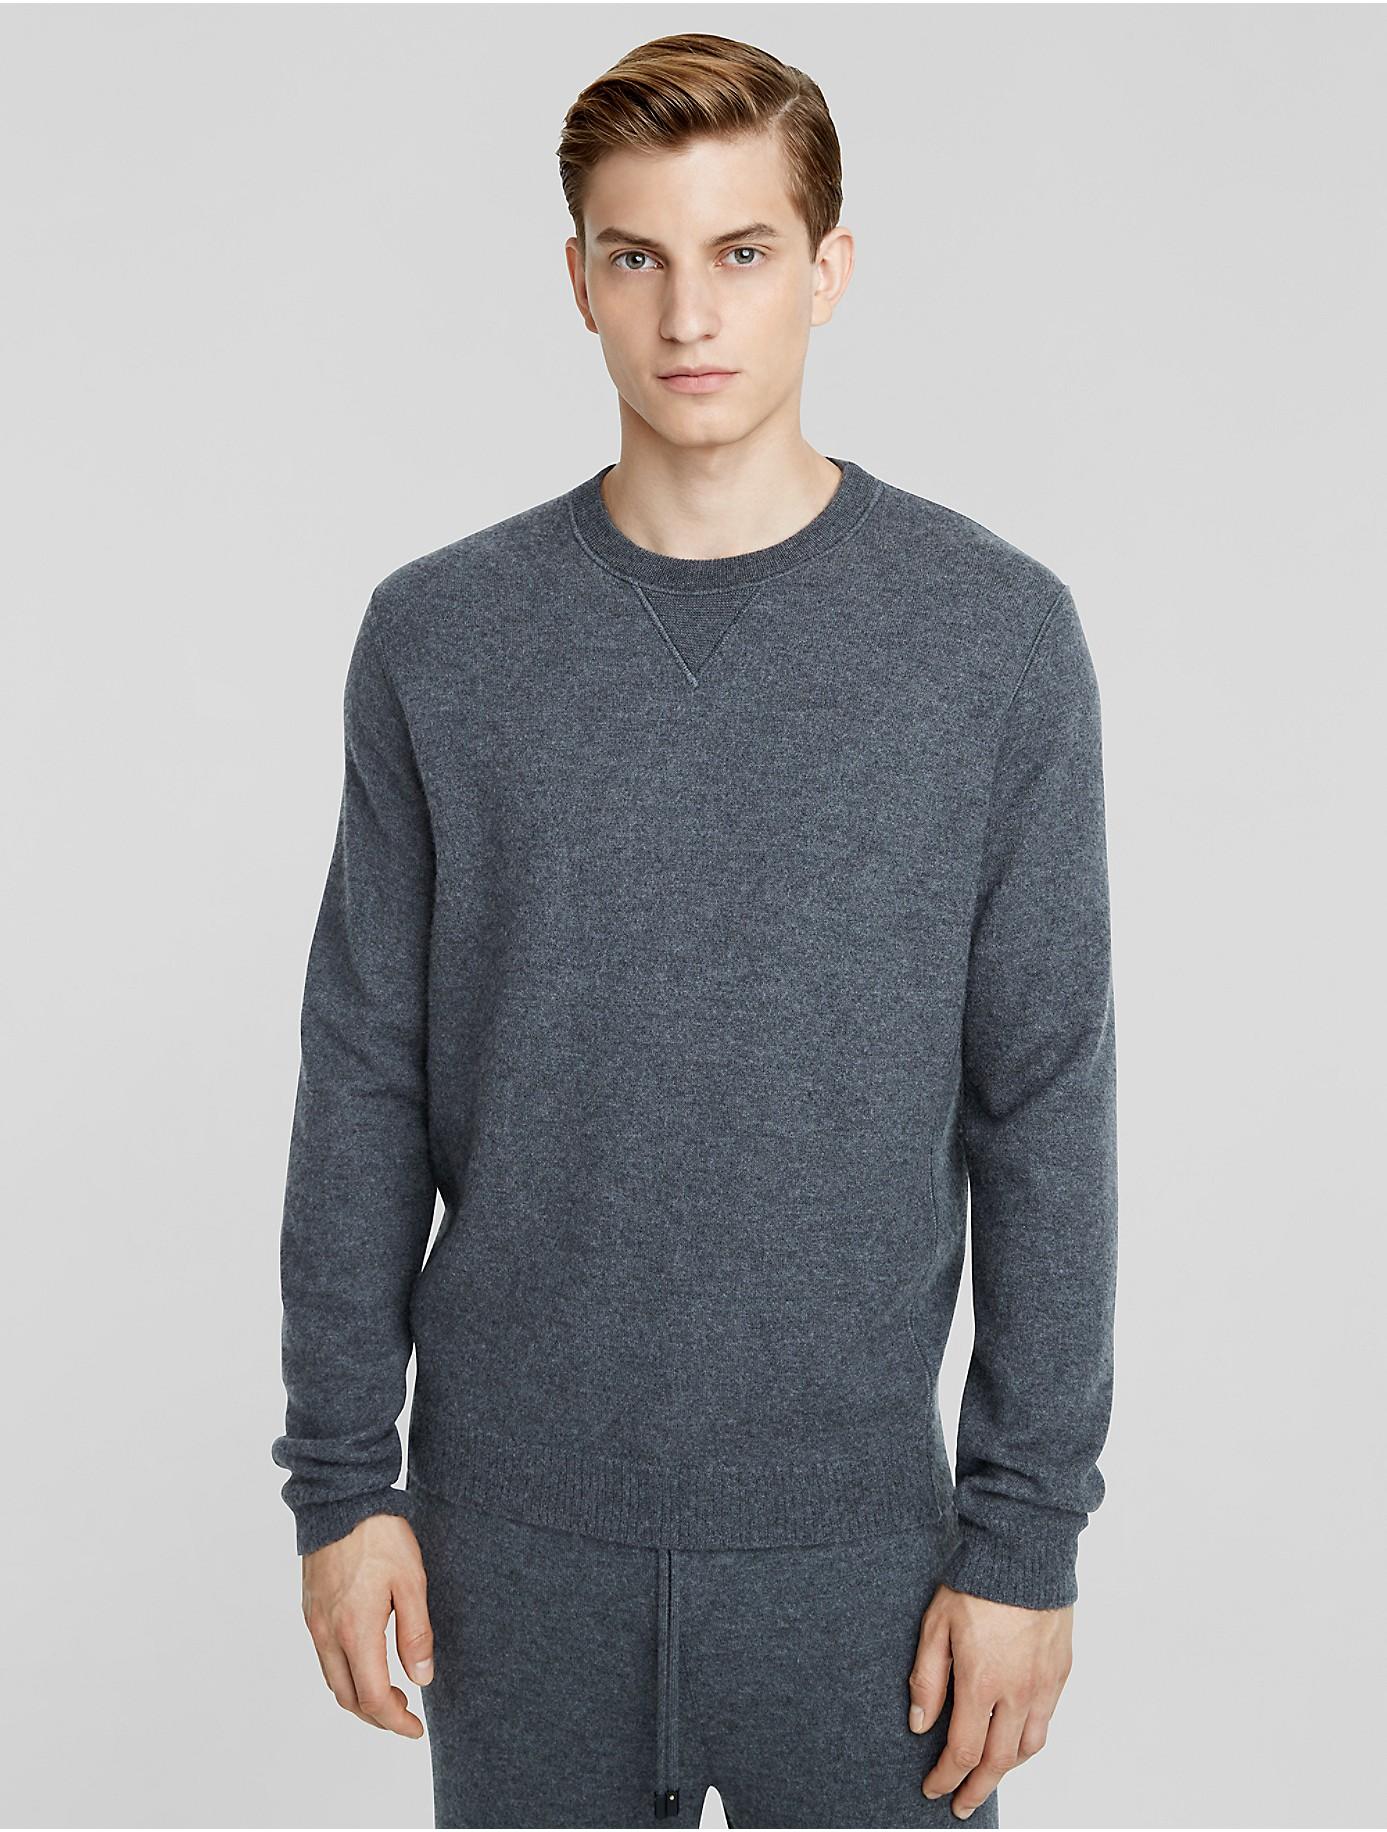 Lyst - Calvin klein Collection Boiled Cashmere Sweatshirt in Gray for Men